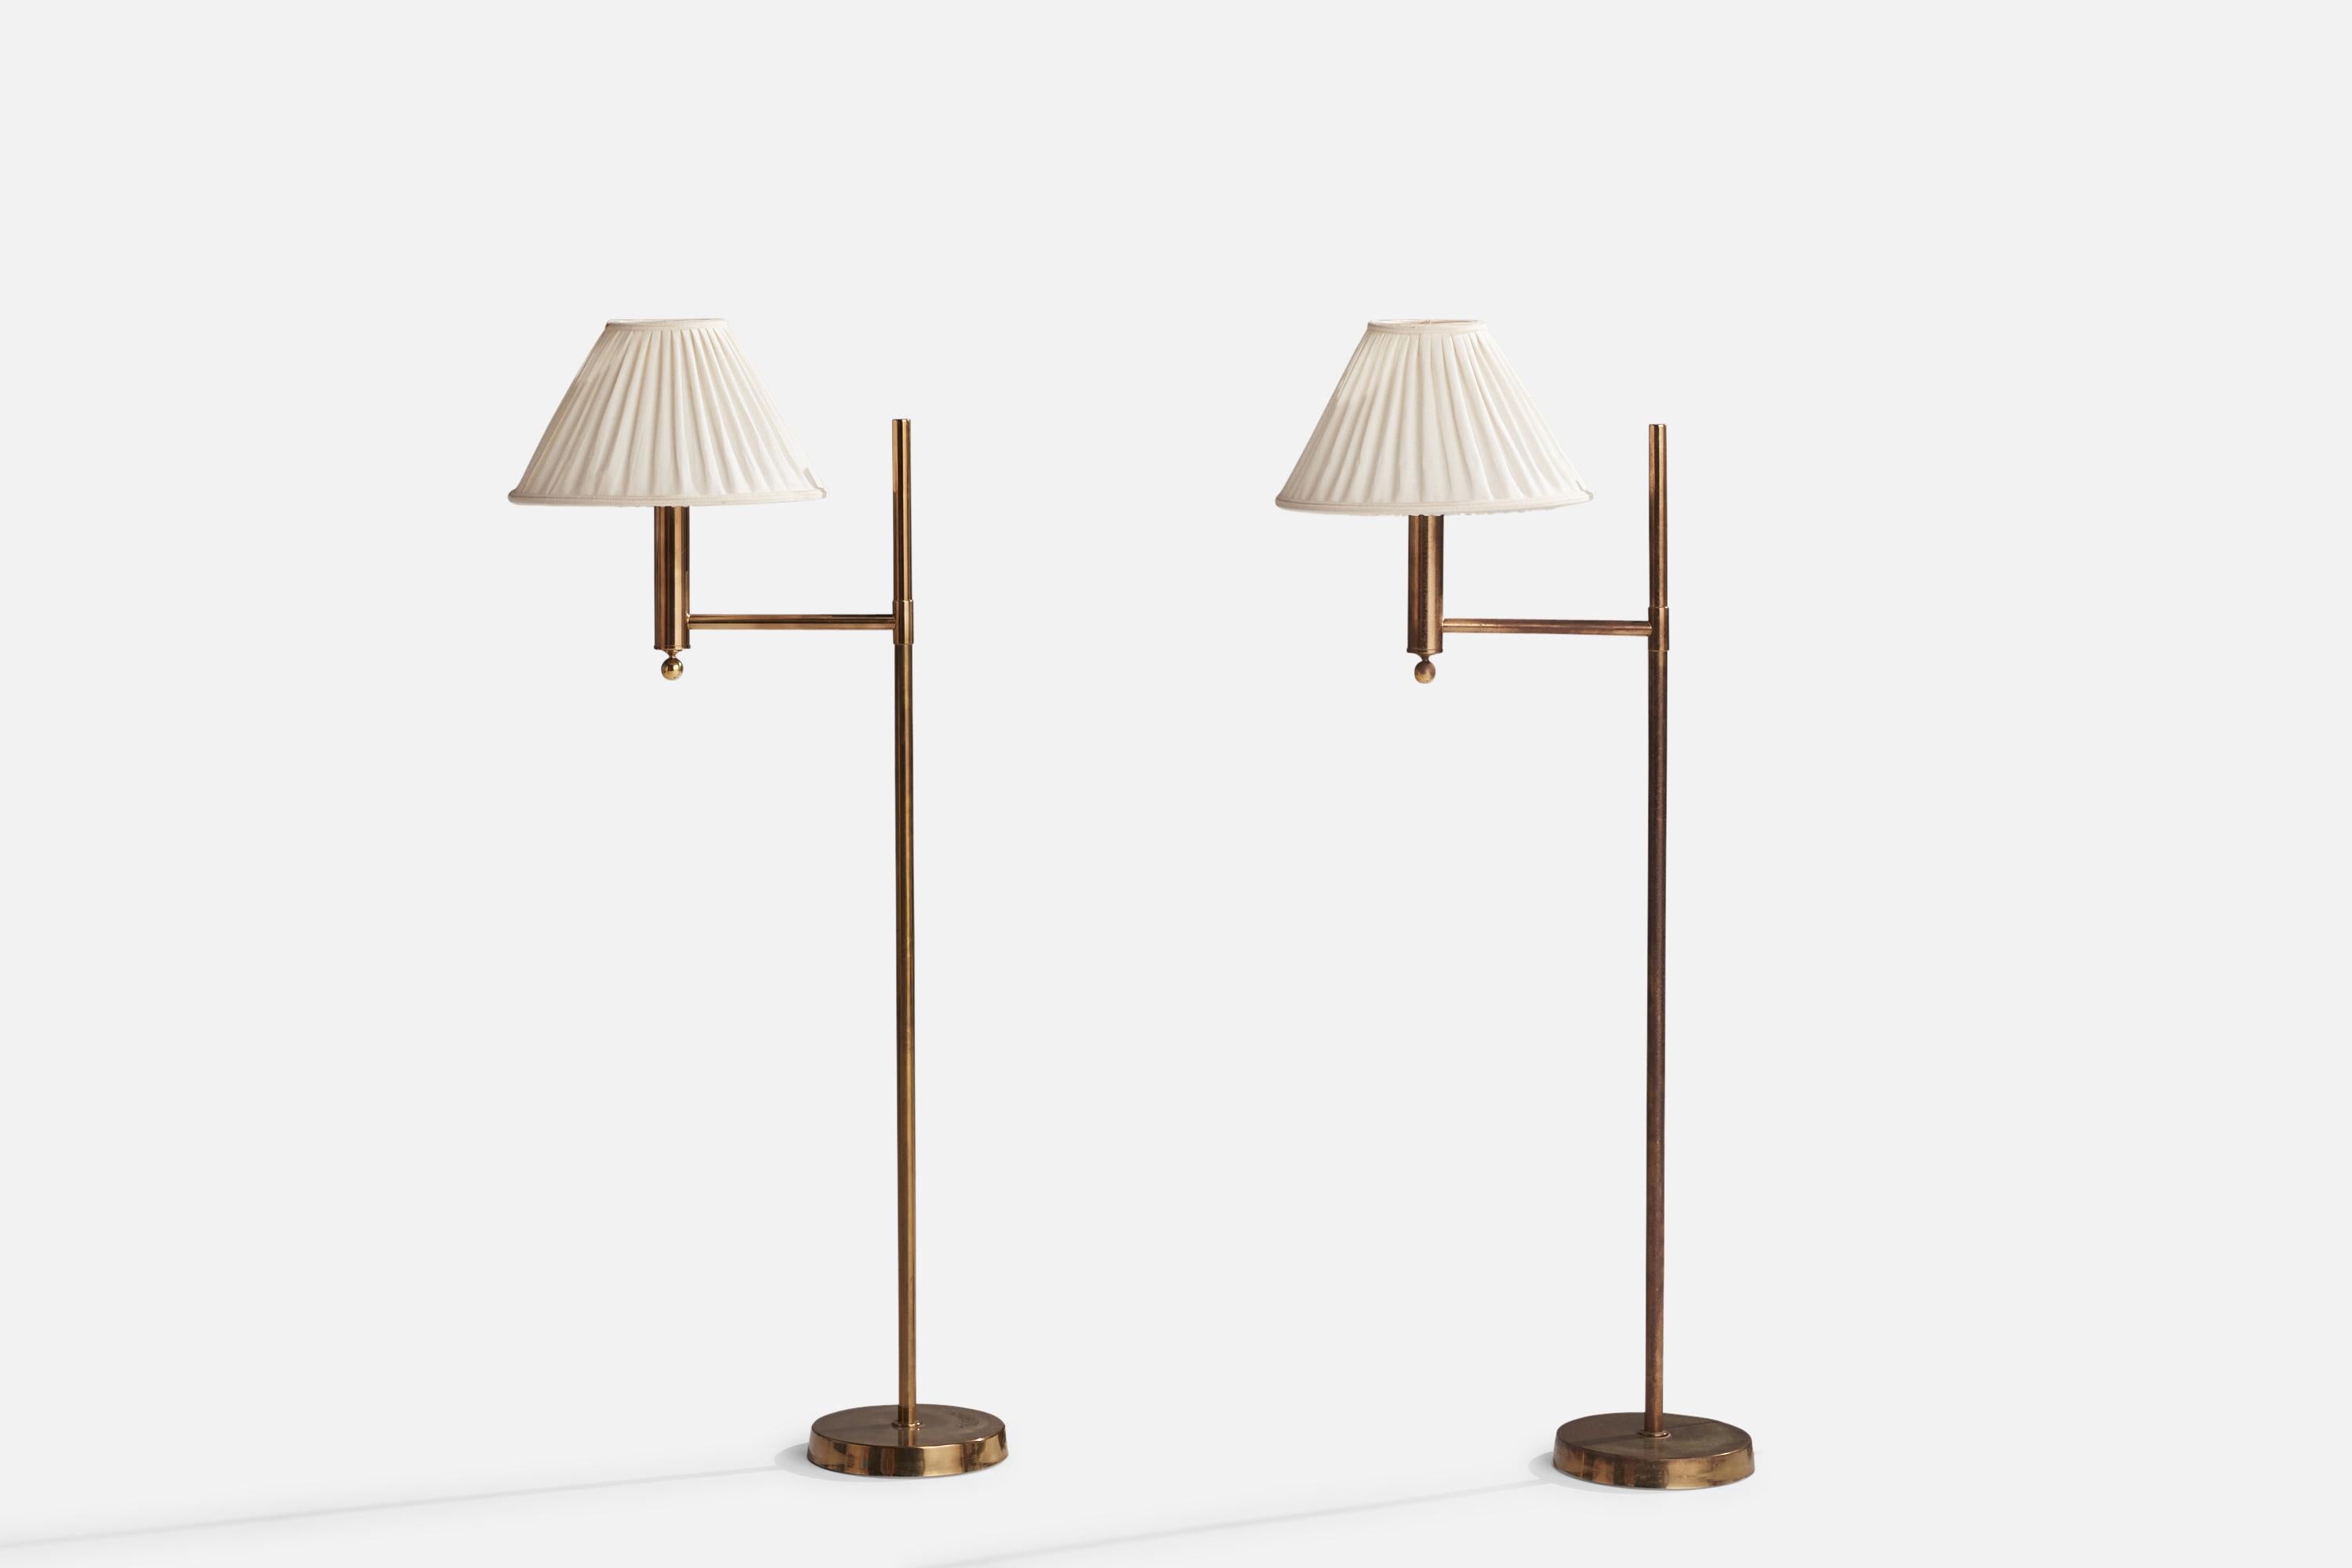 A pair of brass and off-white fabric floor lamps designed and produced in Sweden, 1970s.

Overall Dimensions (inches): 52” H x 14.5” W x 23.5” D
Stated dimensions include shade.
Bulb Specifications: E-26 Bulb
Number of Sockets: 2
All lighting will